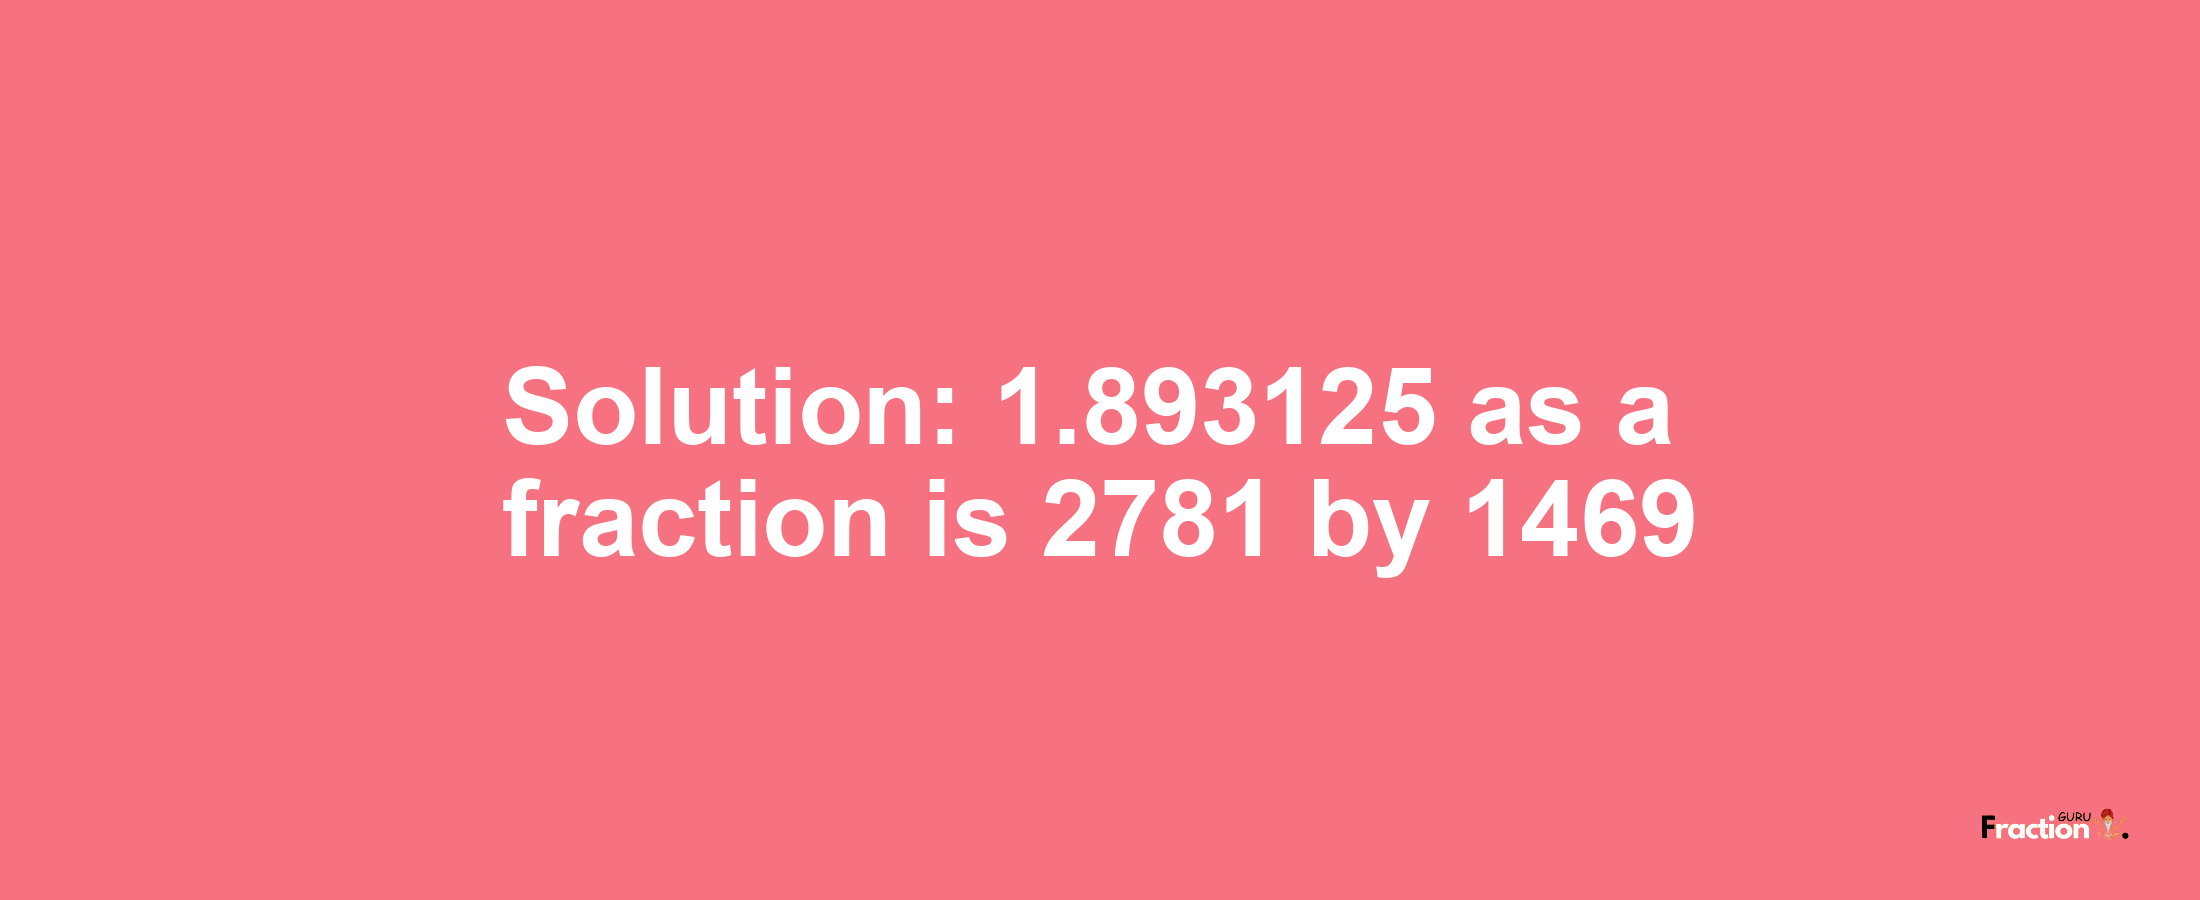 Solution:1.893125 as a fraction is 2781/1469